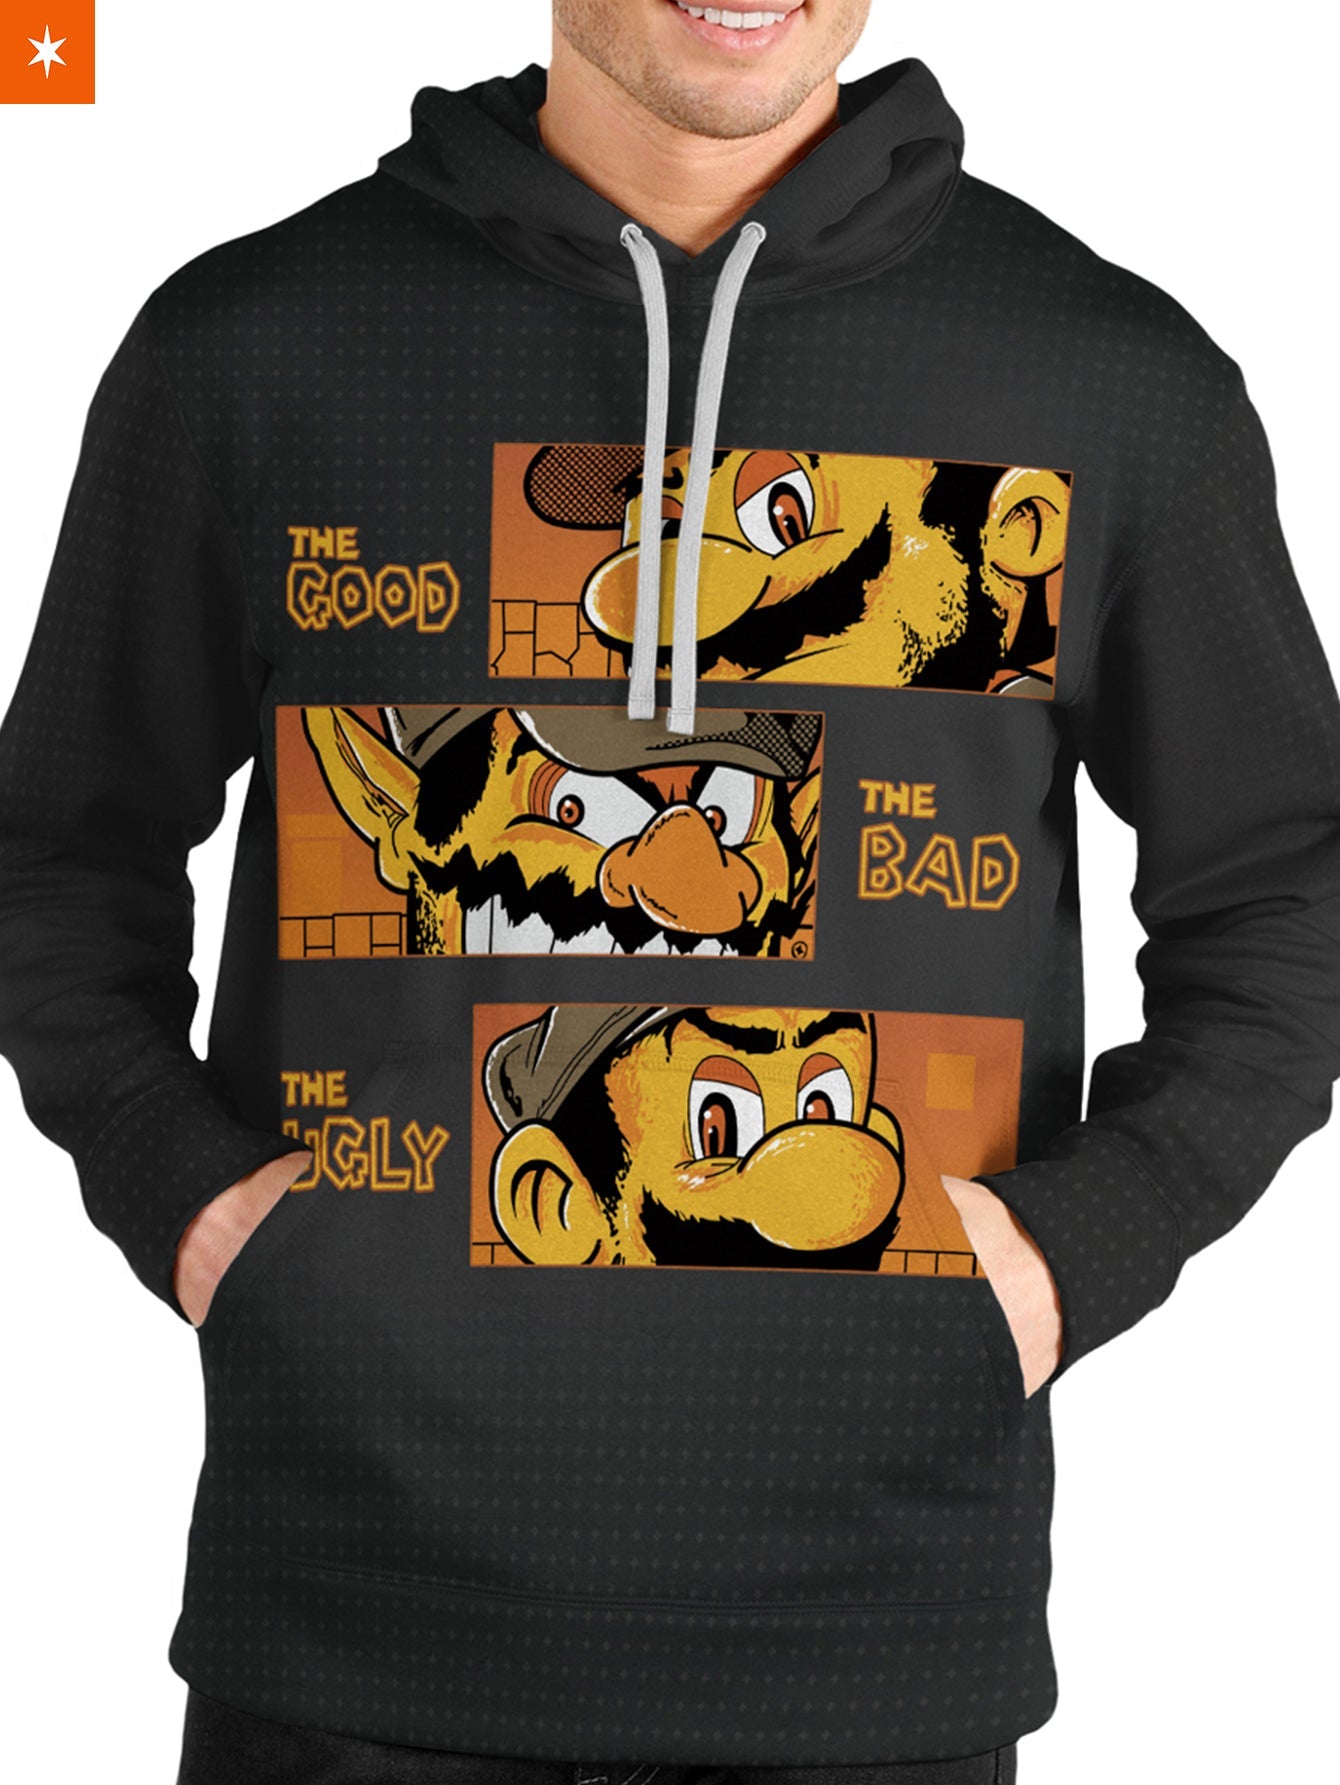 Fandomaniax - The Good, The Bad and The Ugly Unisex Pullover Hoodie